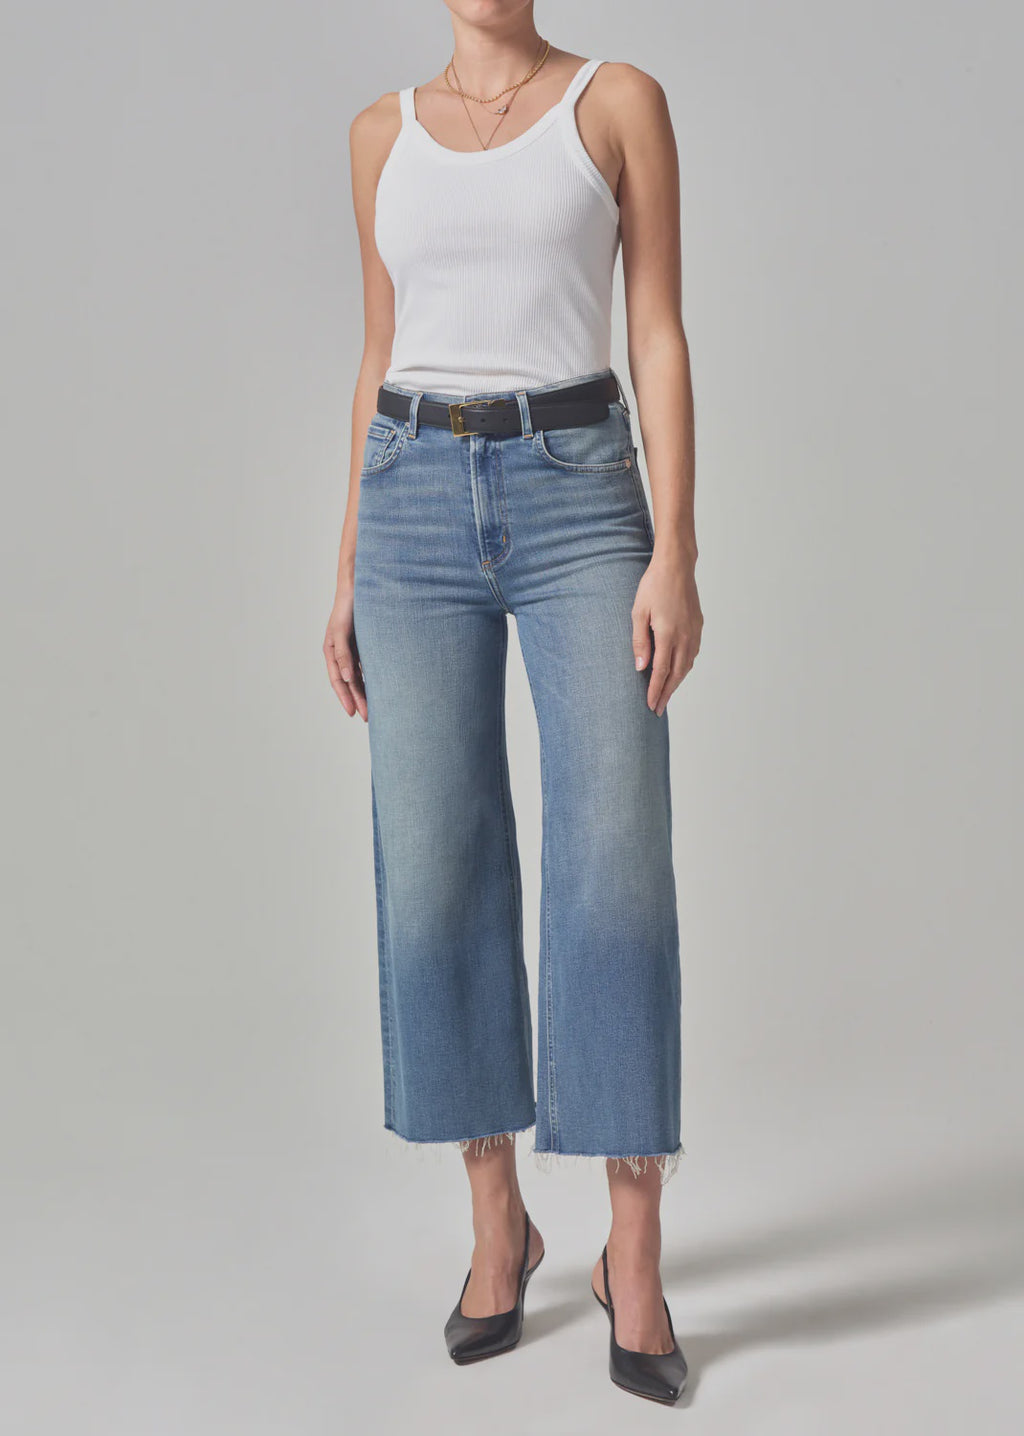 LYRA CROP WIDE LEG  -  ABLISS - CITIZENS OF HUMANITY